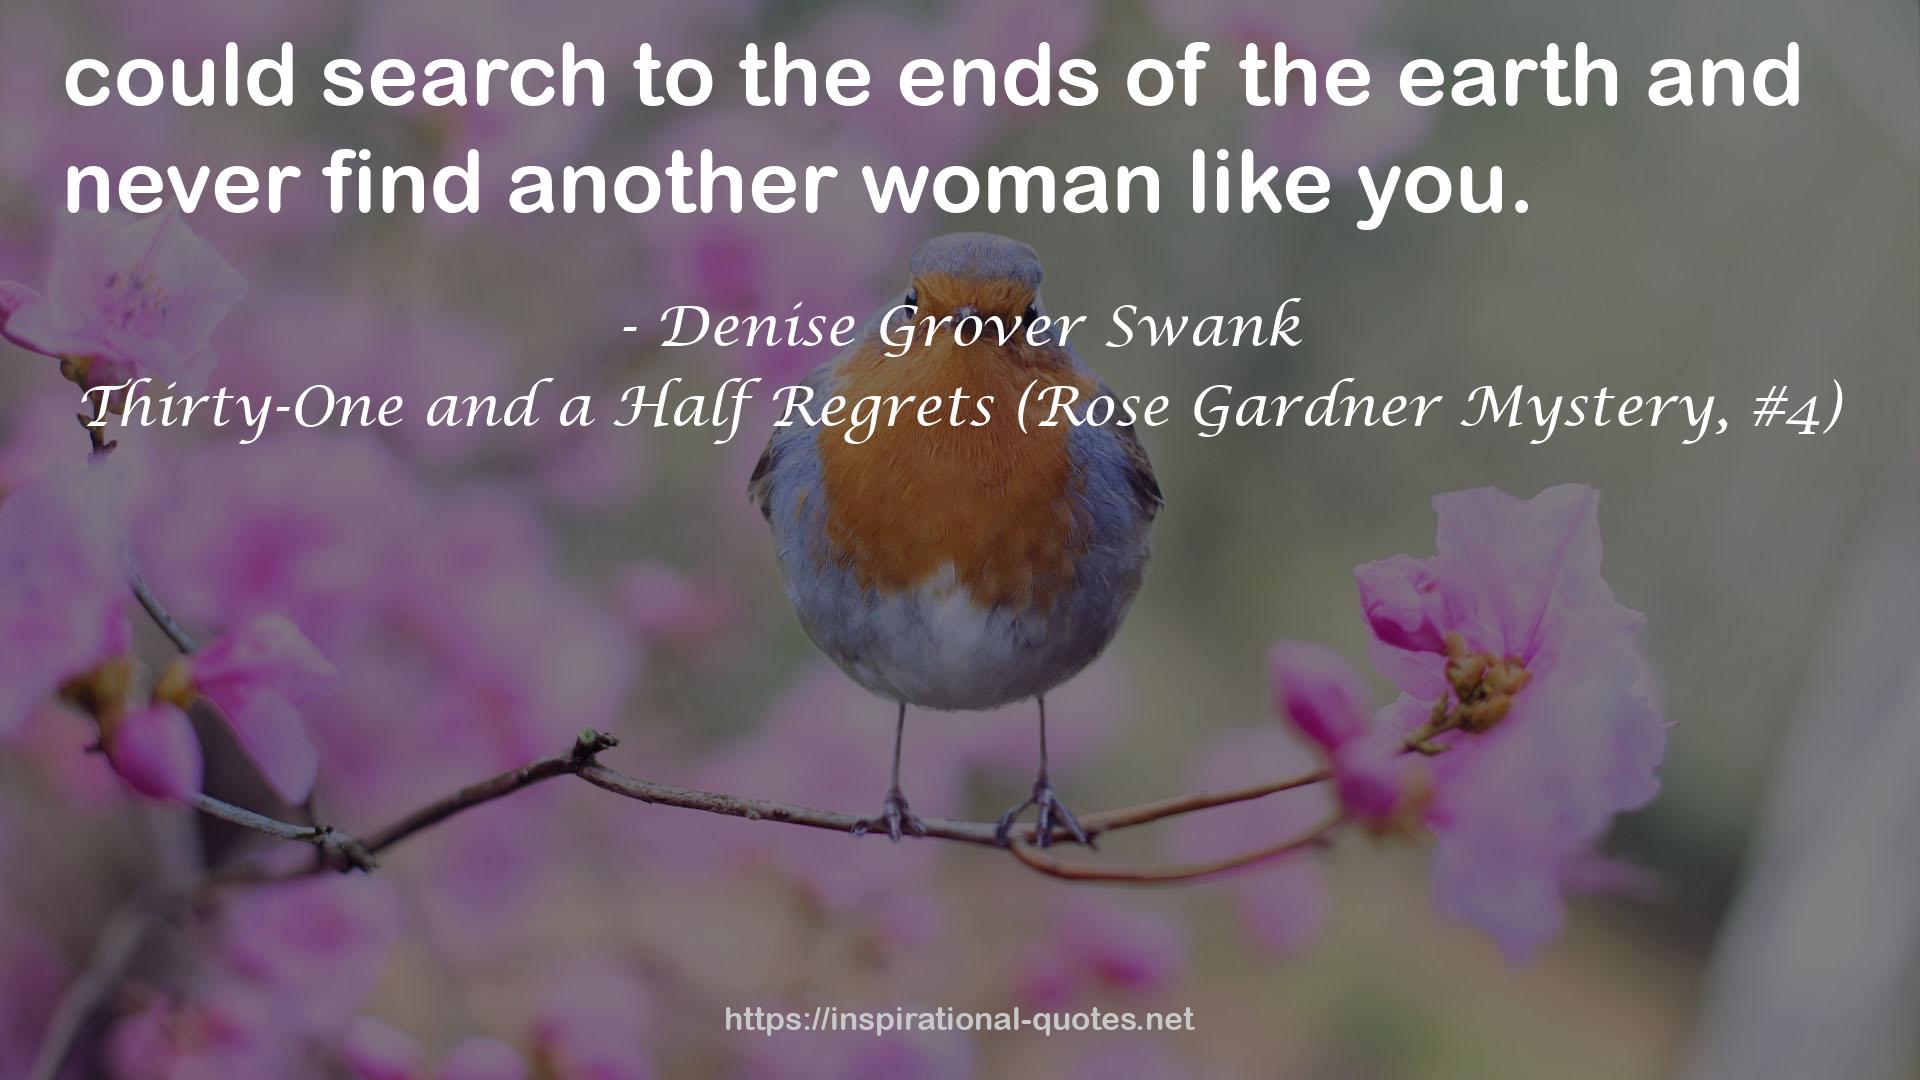 Thirty-One and a Half Regrets (Rose Gardner Mystery, #4) QUOTES